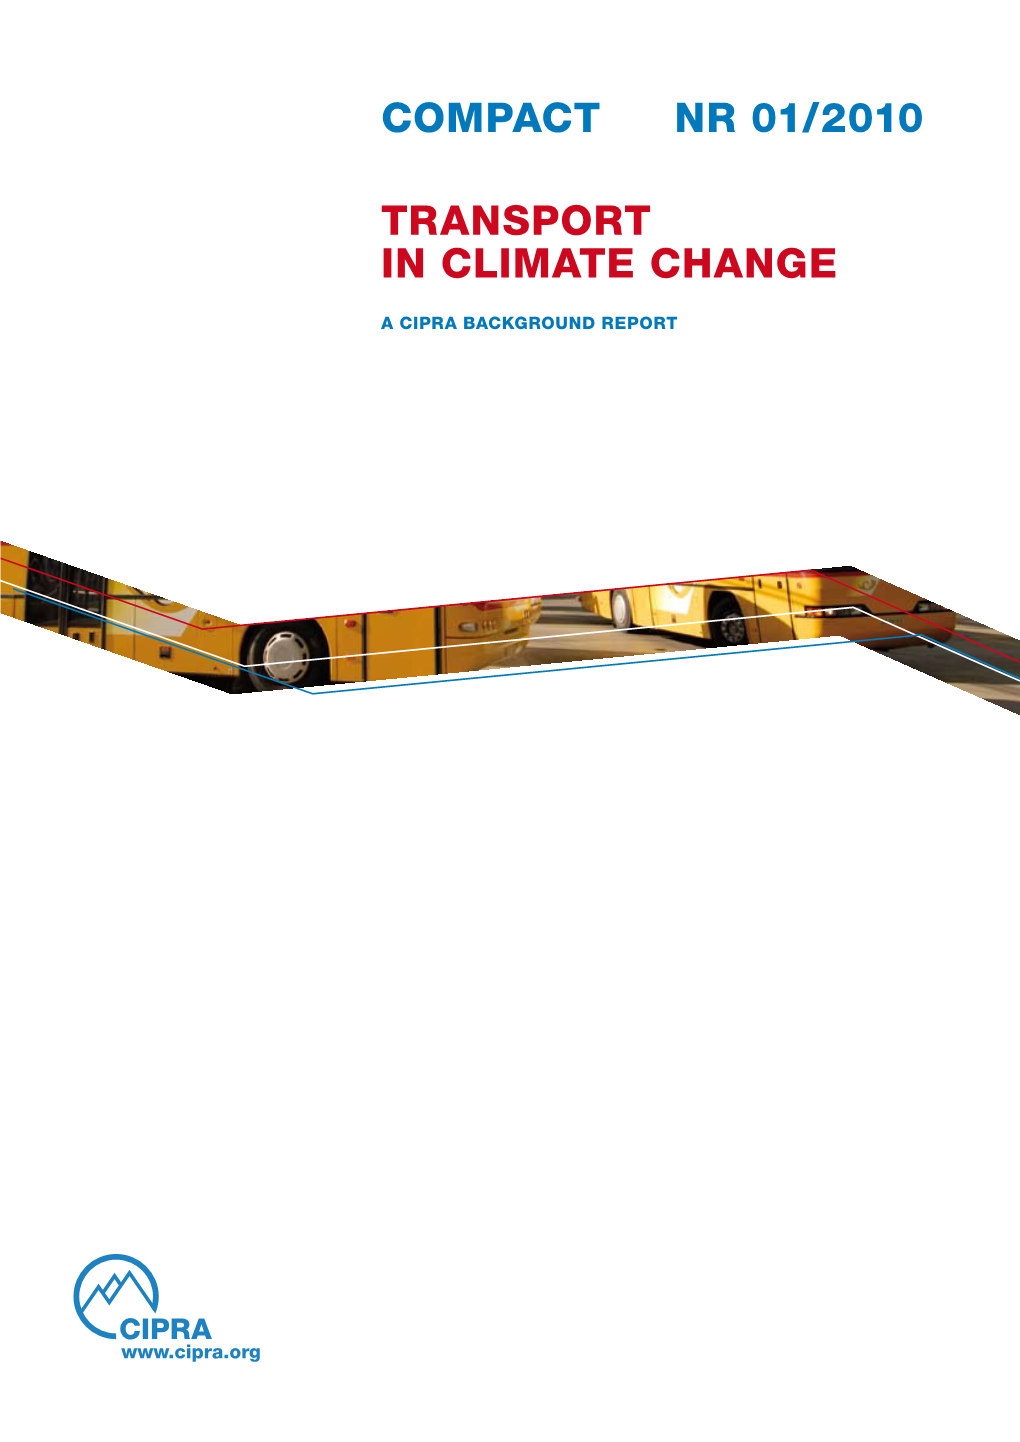 Compact Nr 01/2010 Transport in Climate Change